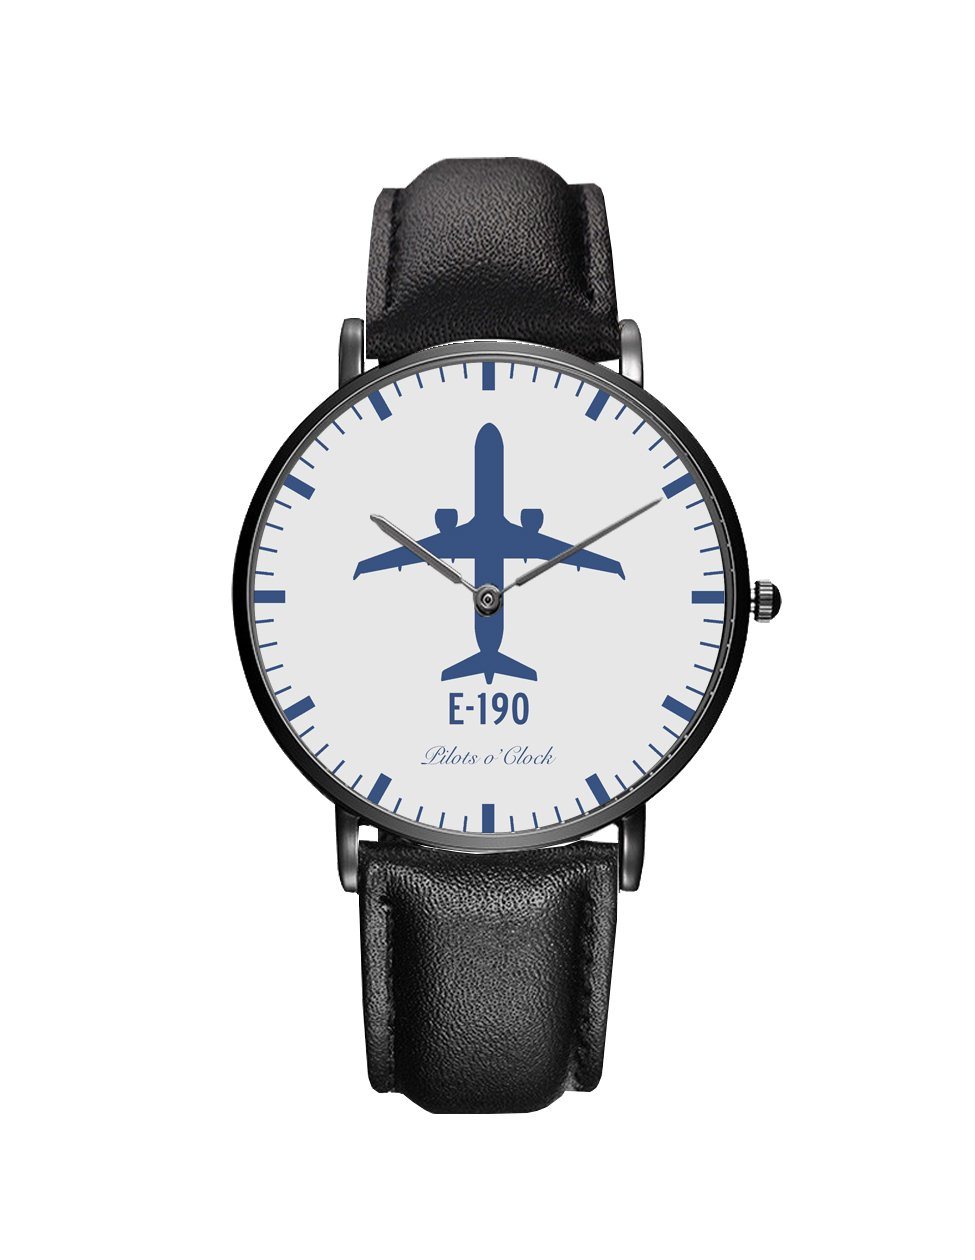 Embraer E190 Leather Strap Watches Pilot Eyes Store Black & Black Leather Strap 